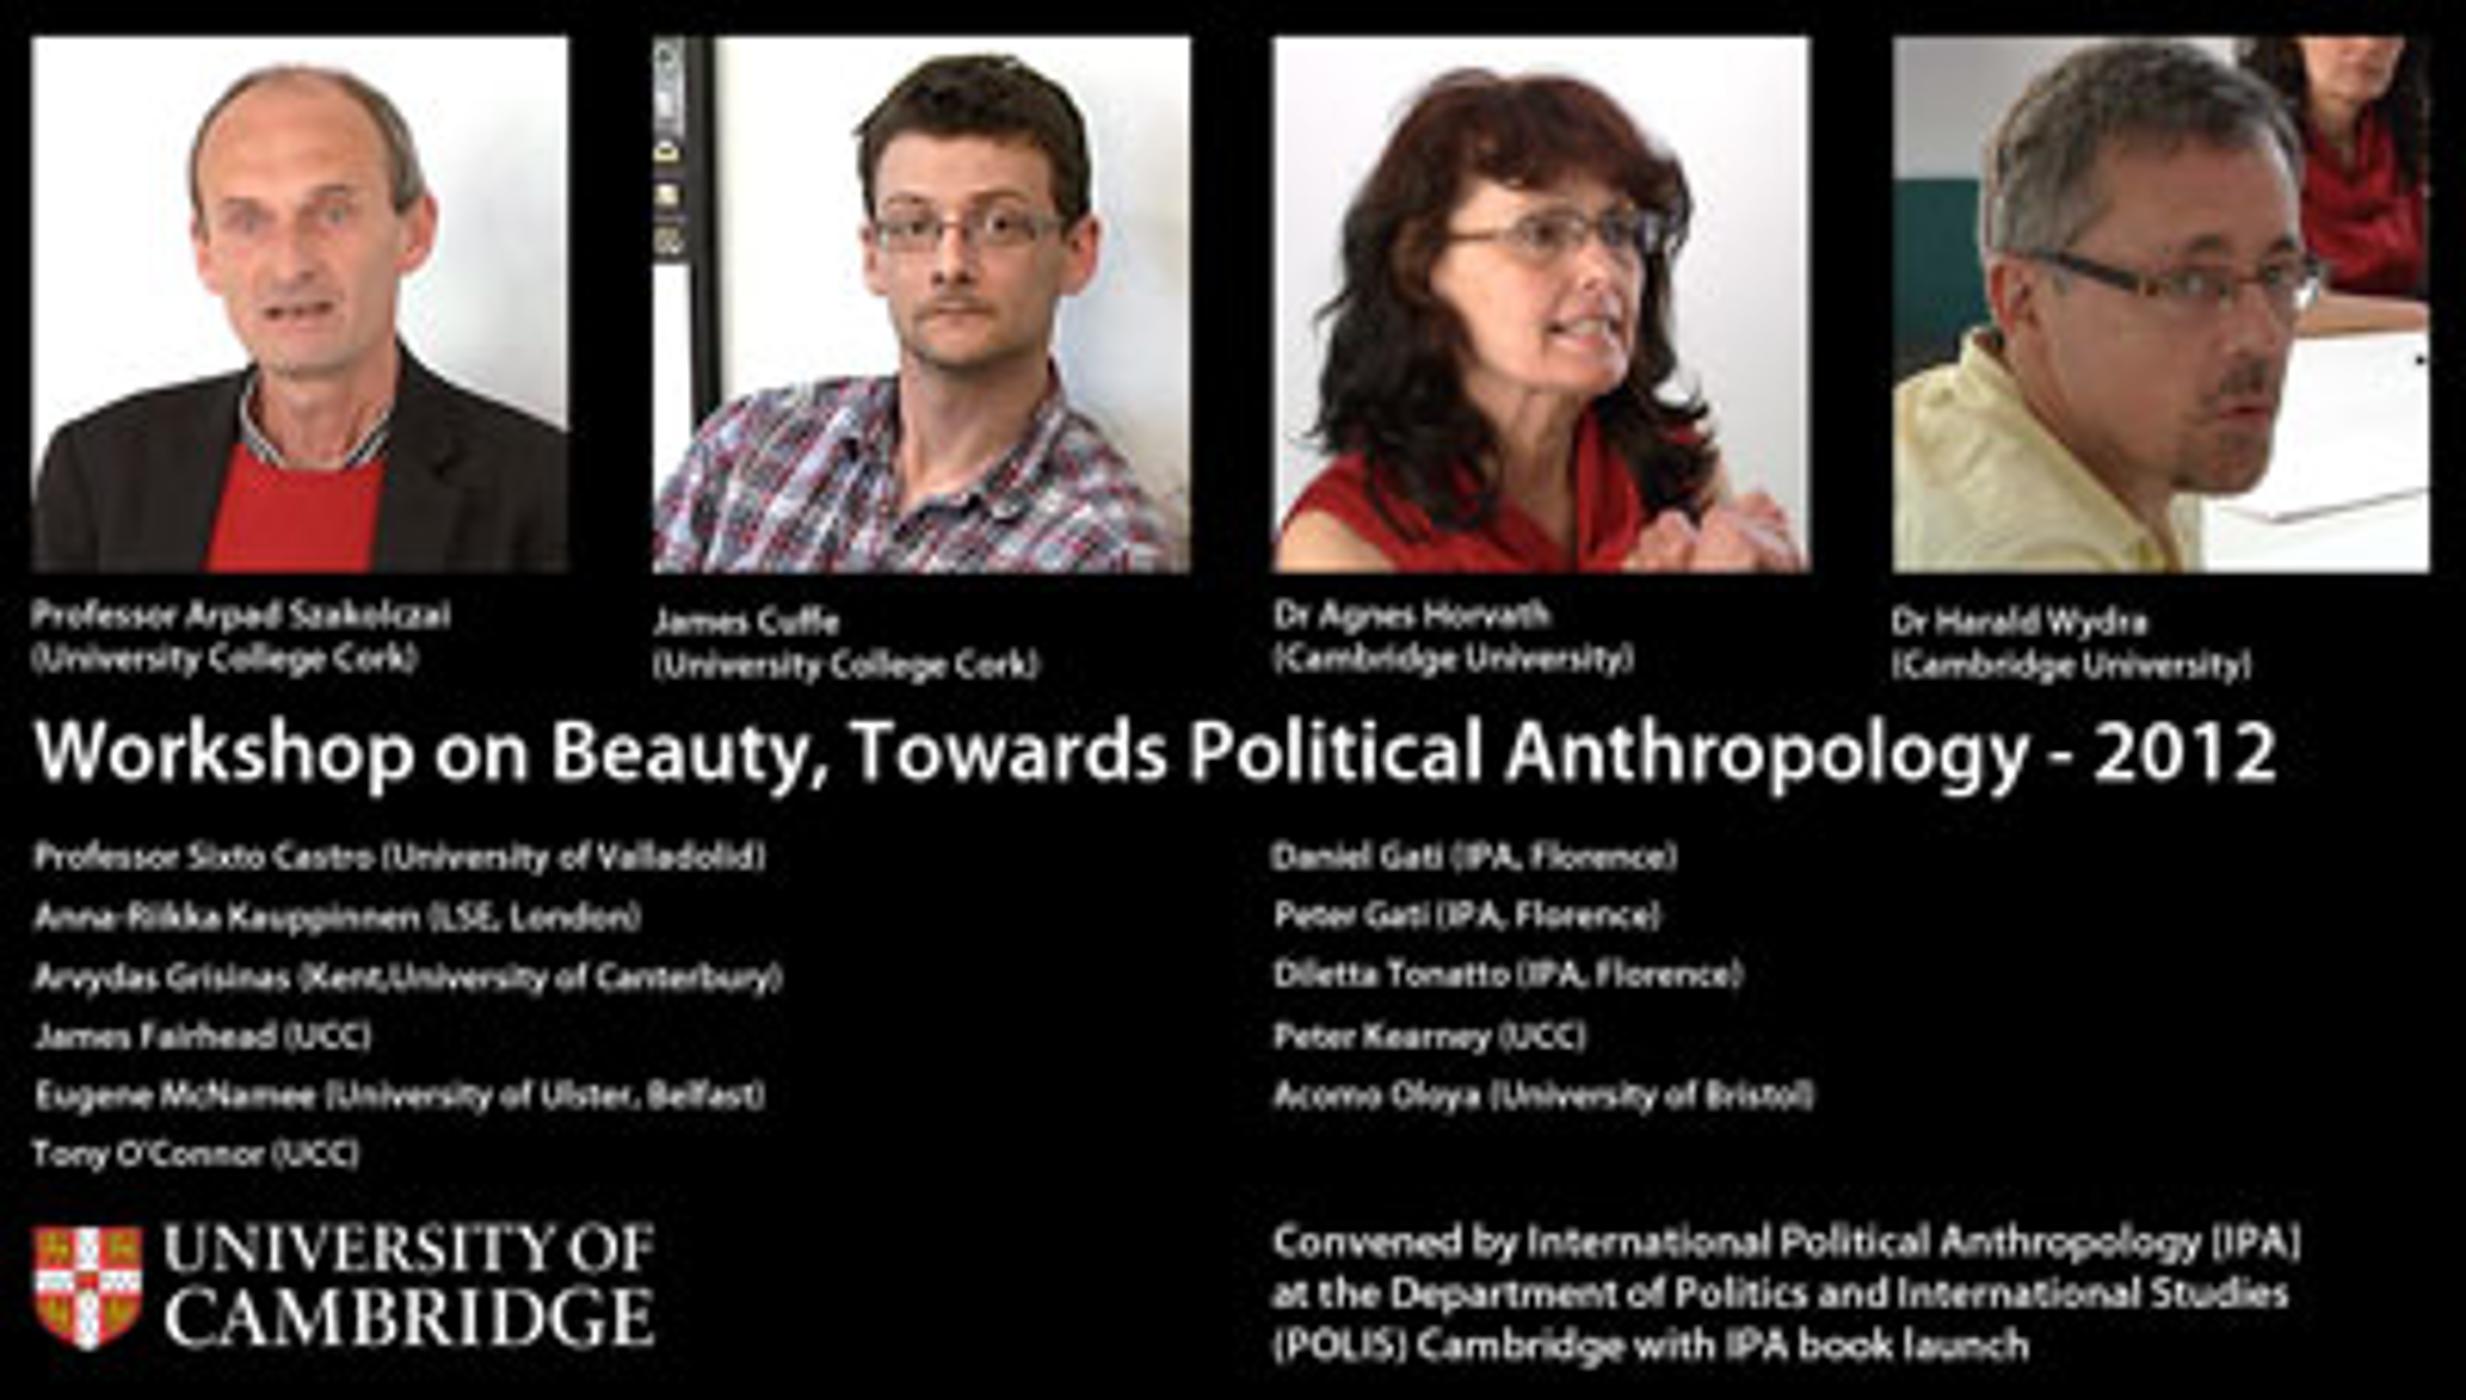 Workshop on Beauty, Towards Political Anthropology - 2012